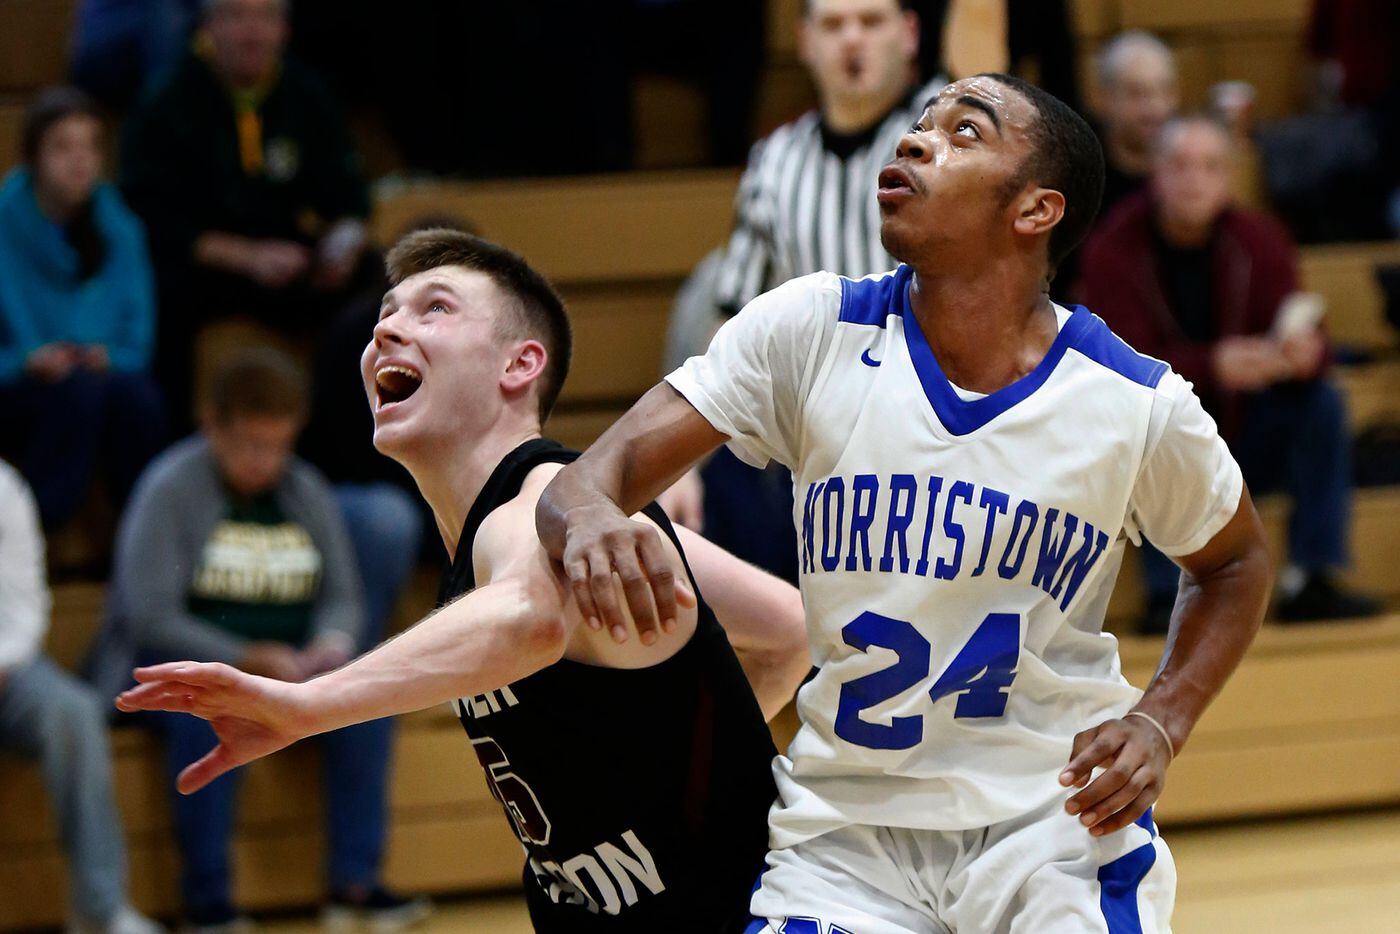 Nazir Kinney (right) of Norristown battles for rebound position with Theo Henry of Lower Merion in the fourth quarter.